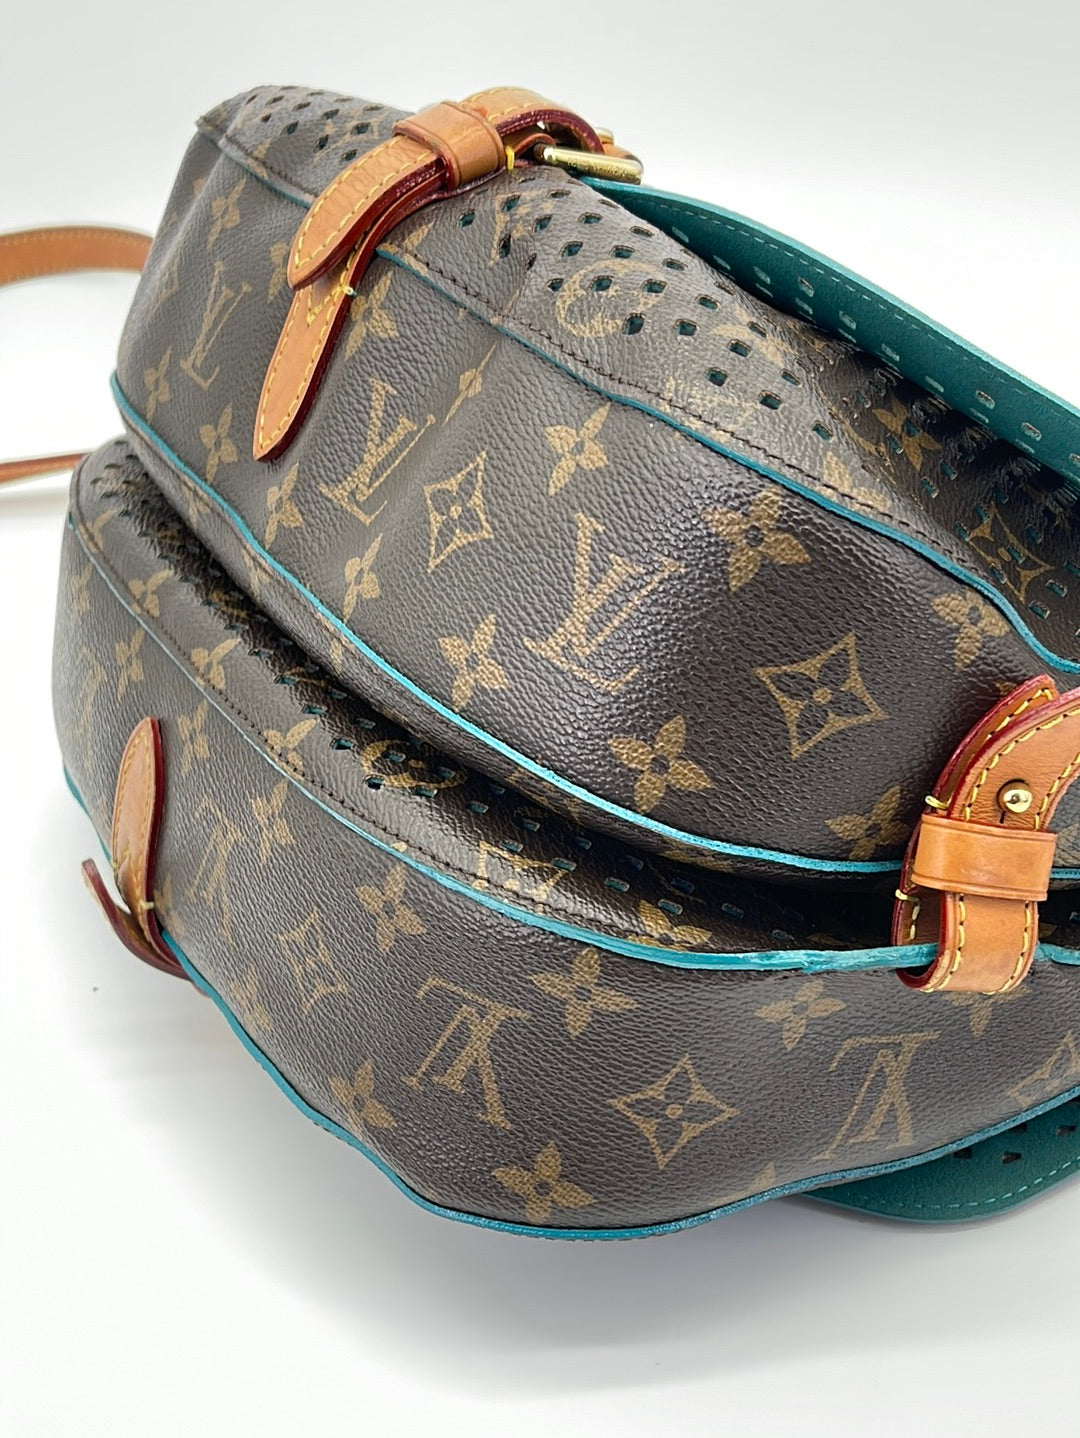 Louis Vuitton latest limited edition bag by Sofia Coppola